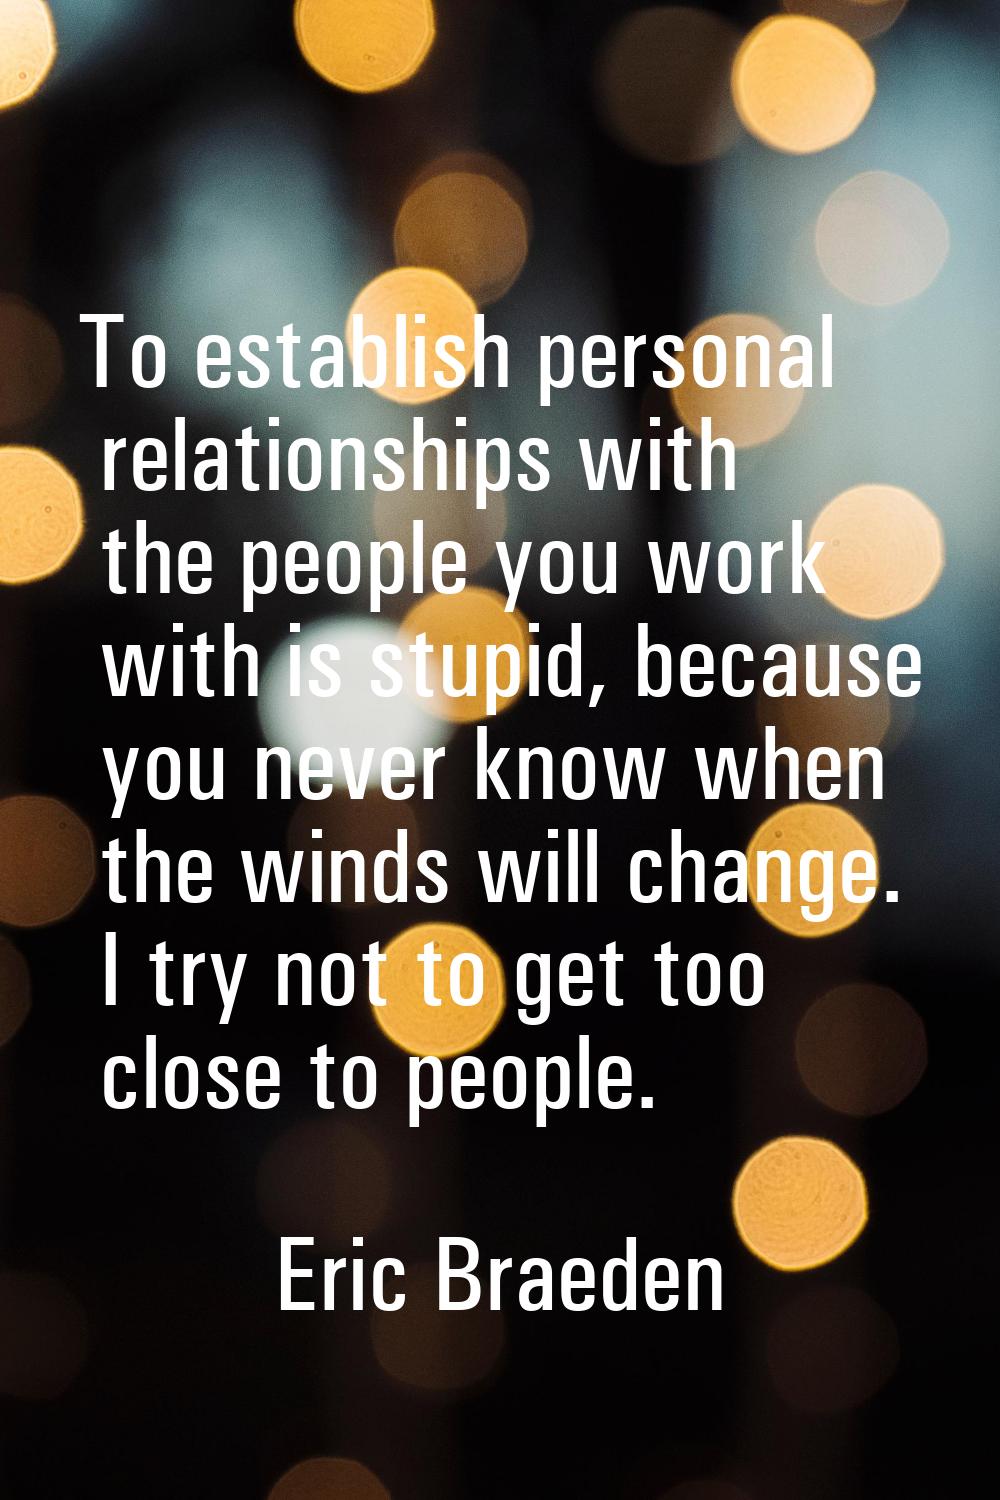 To establish personal relationships with the people you work with is stupid, because you never know